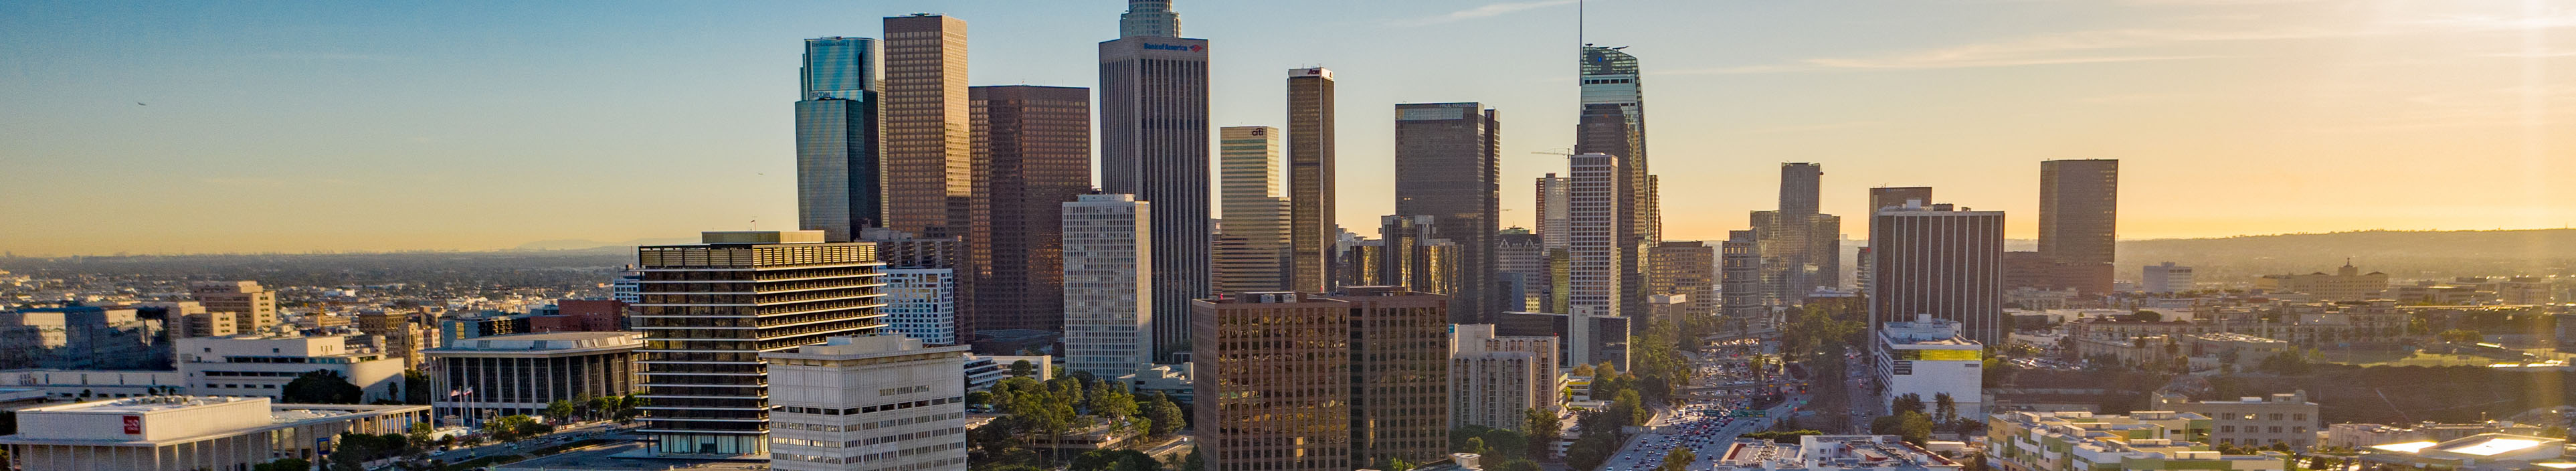 Blick auf Downtown Los Angeles